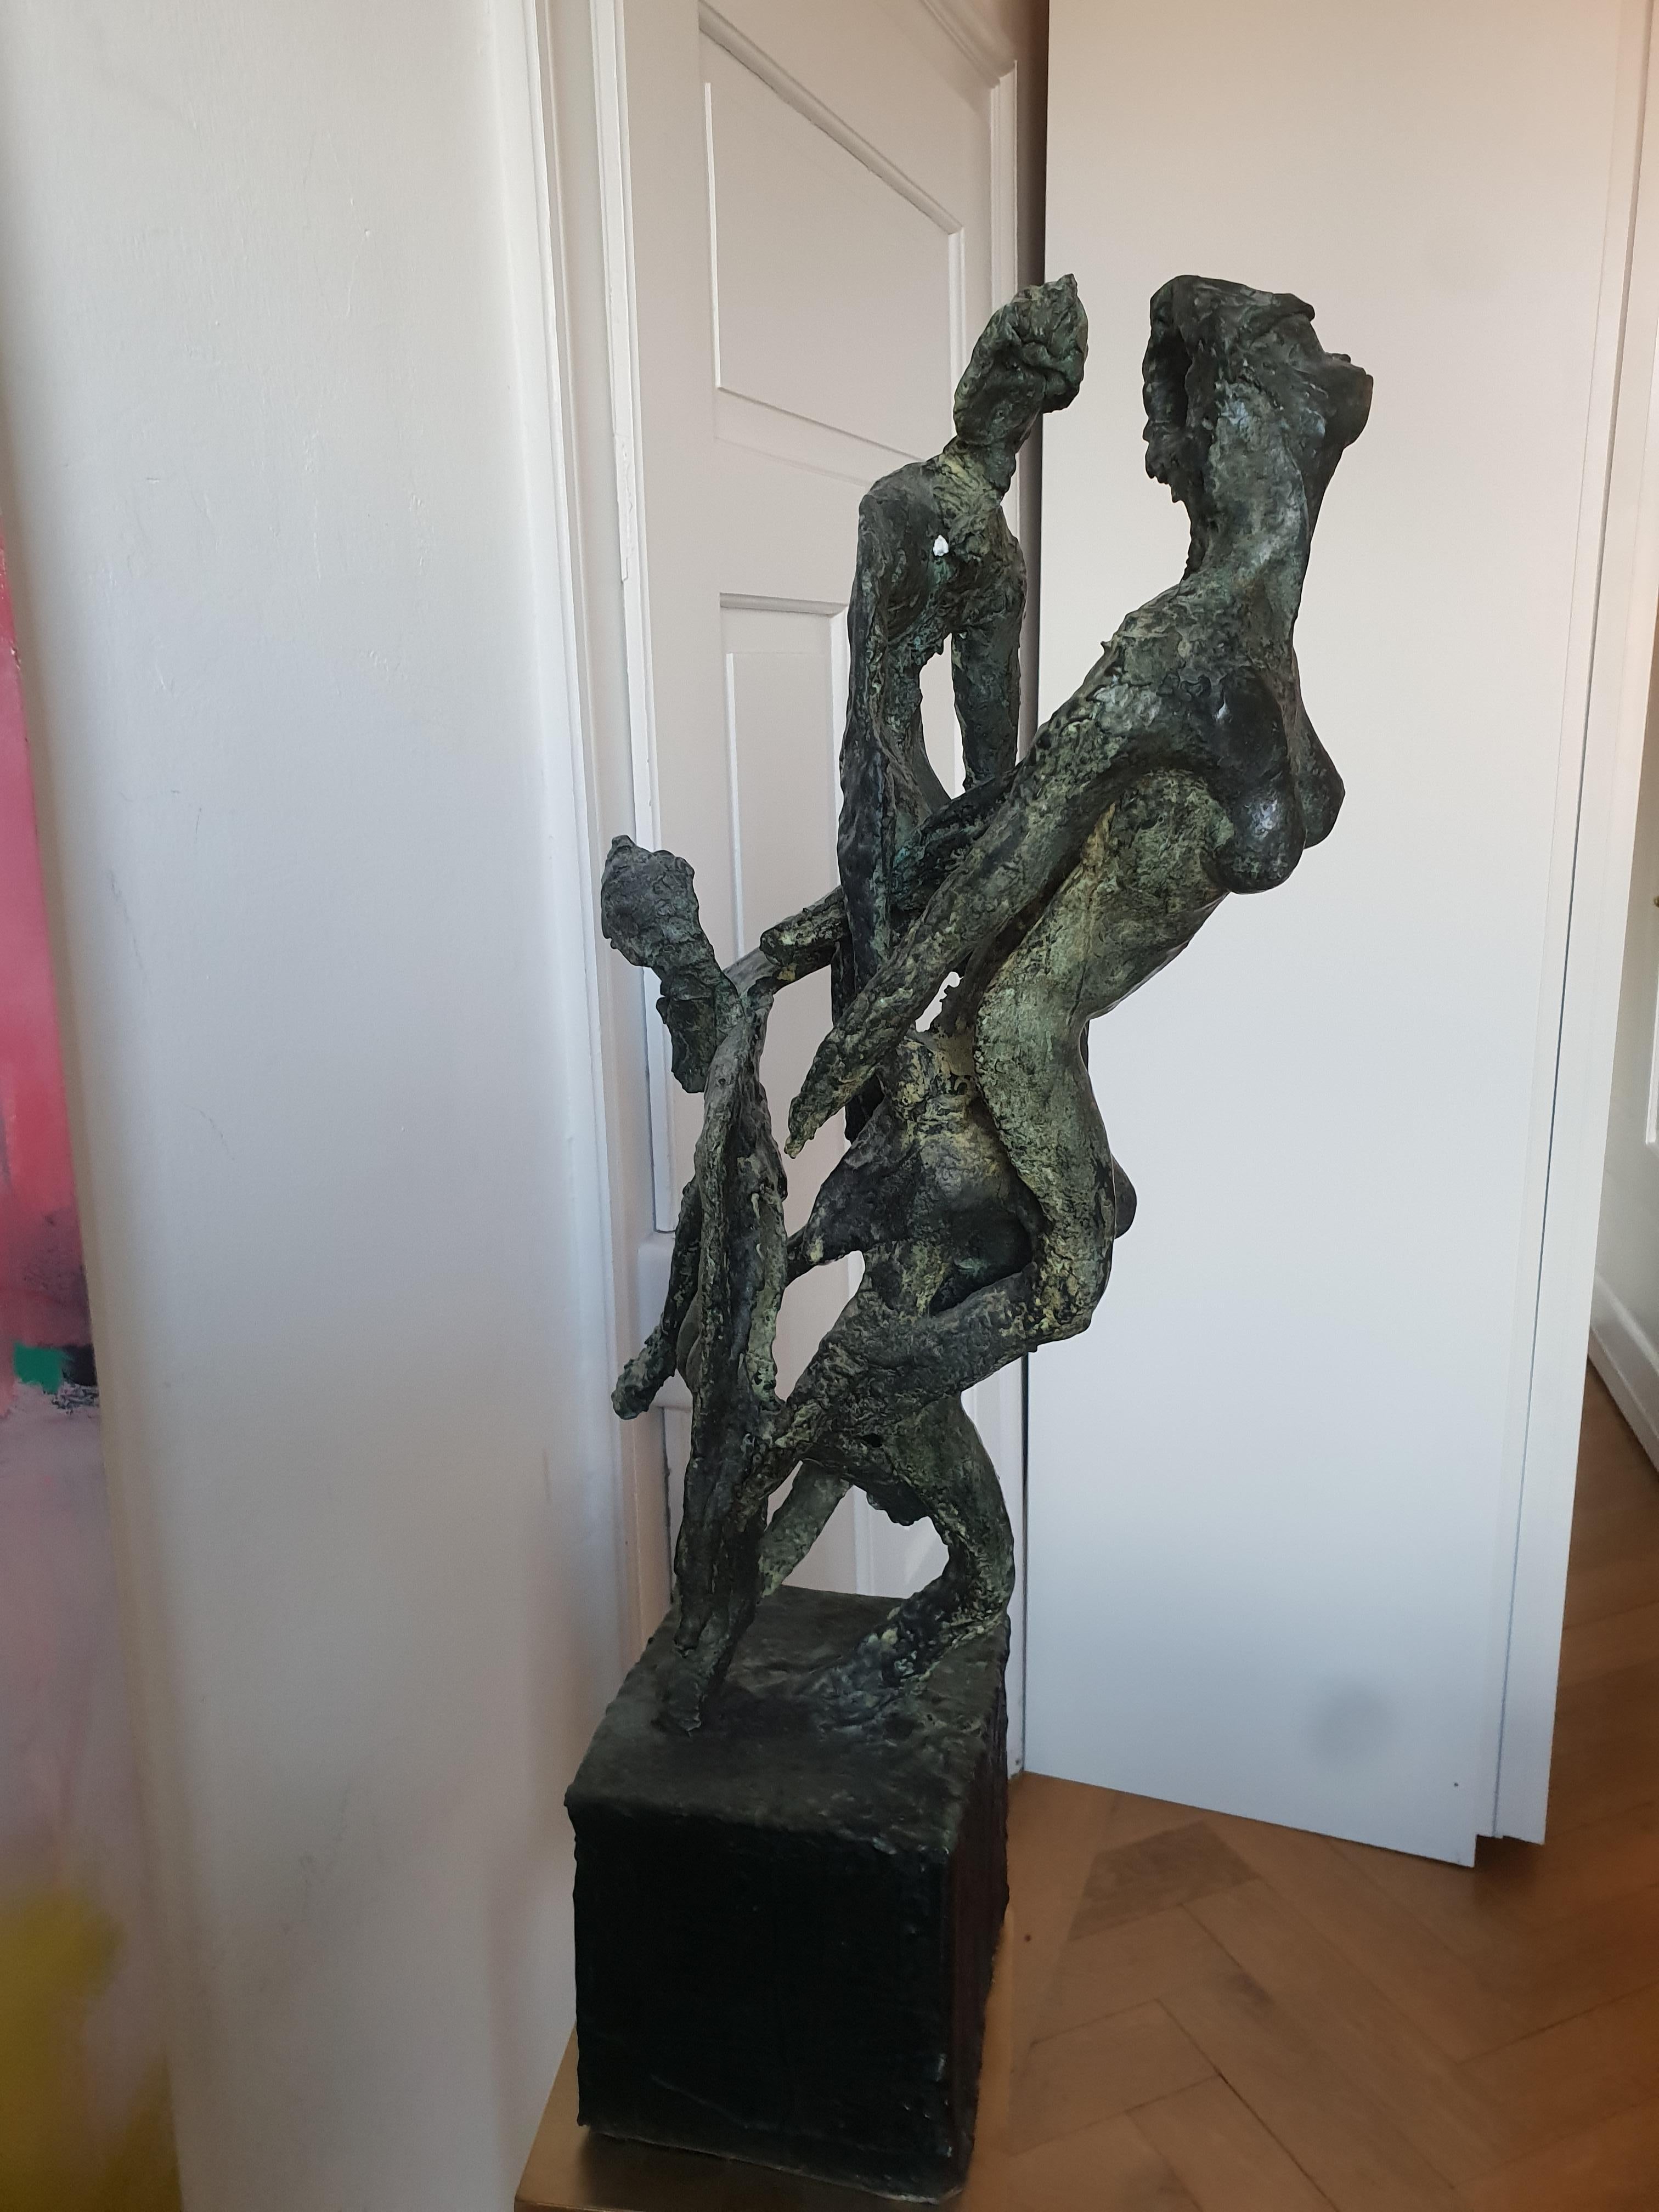 Nymphs by Emmanuel Okoro sculpture of nude female nymphs, black / green patina 4